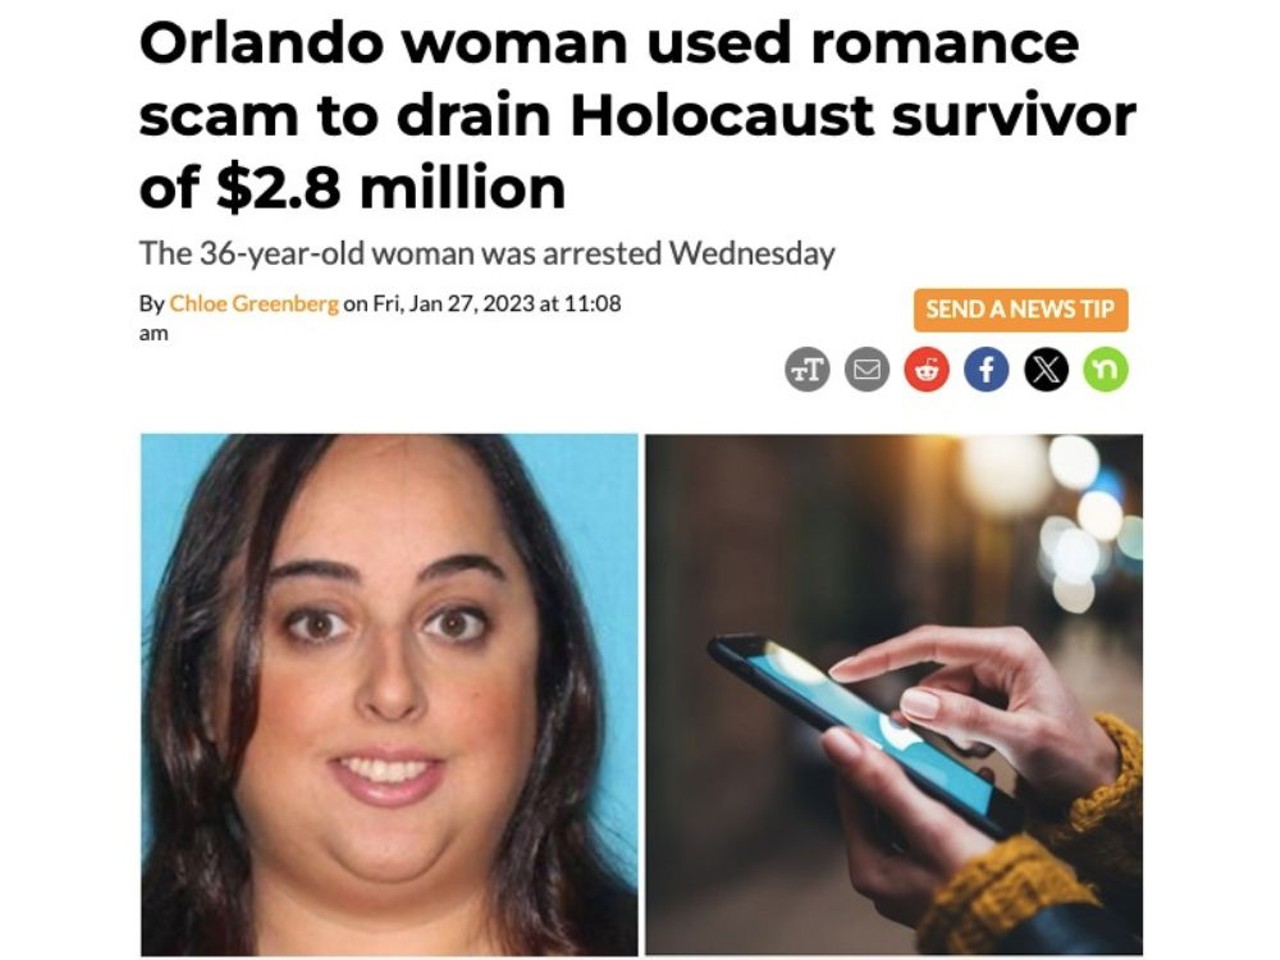 The 36-year-old woman, Peaches Stergo, used a years-long scam to steal the unnamed victim's life savings. She was arrested and charged with one count of wire fraud, and is now facing up to 20 years in prison. Read full article